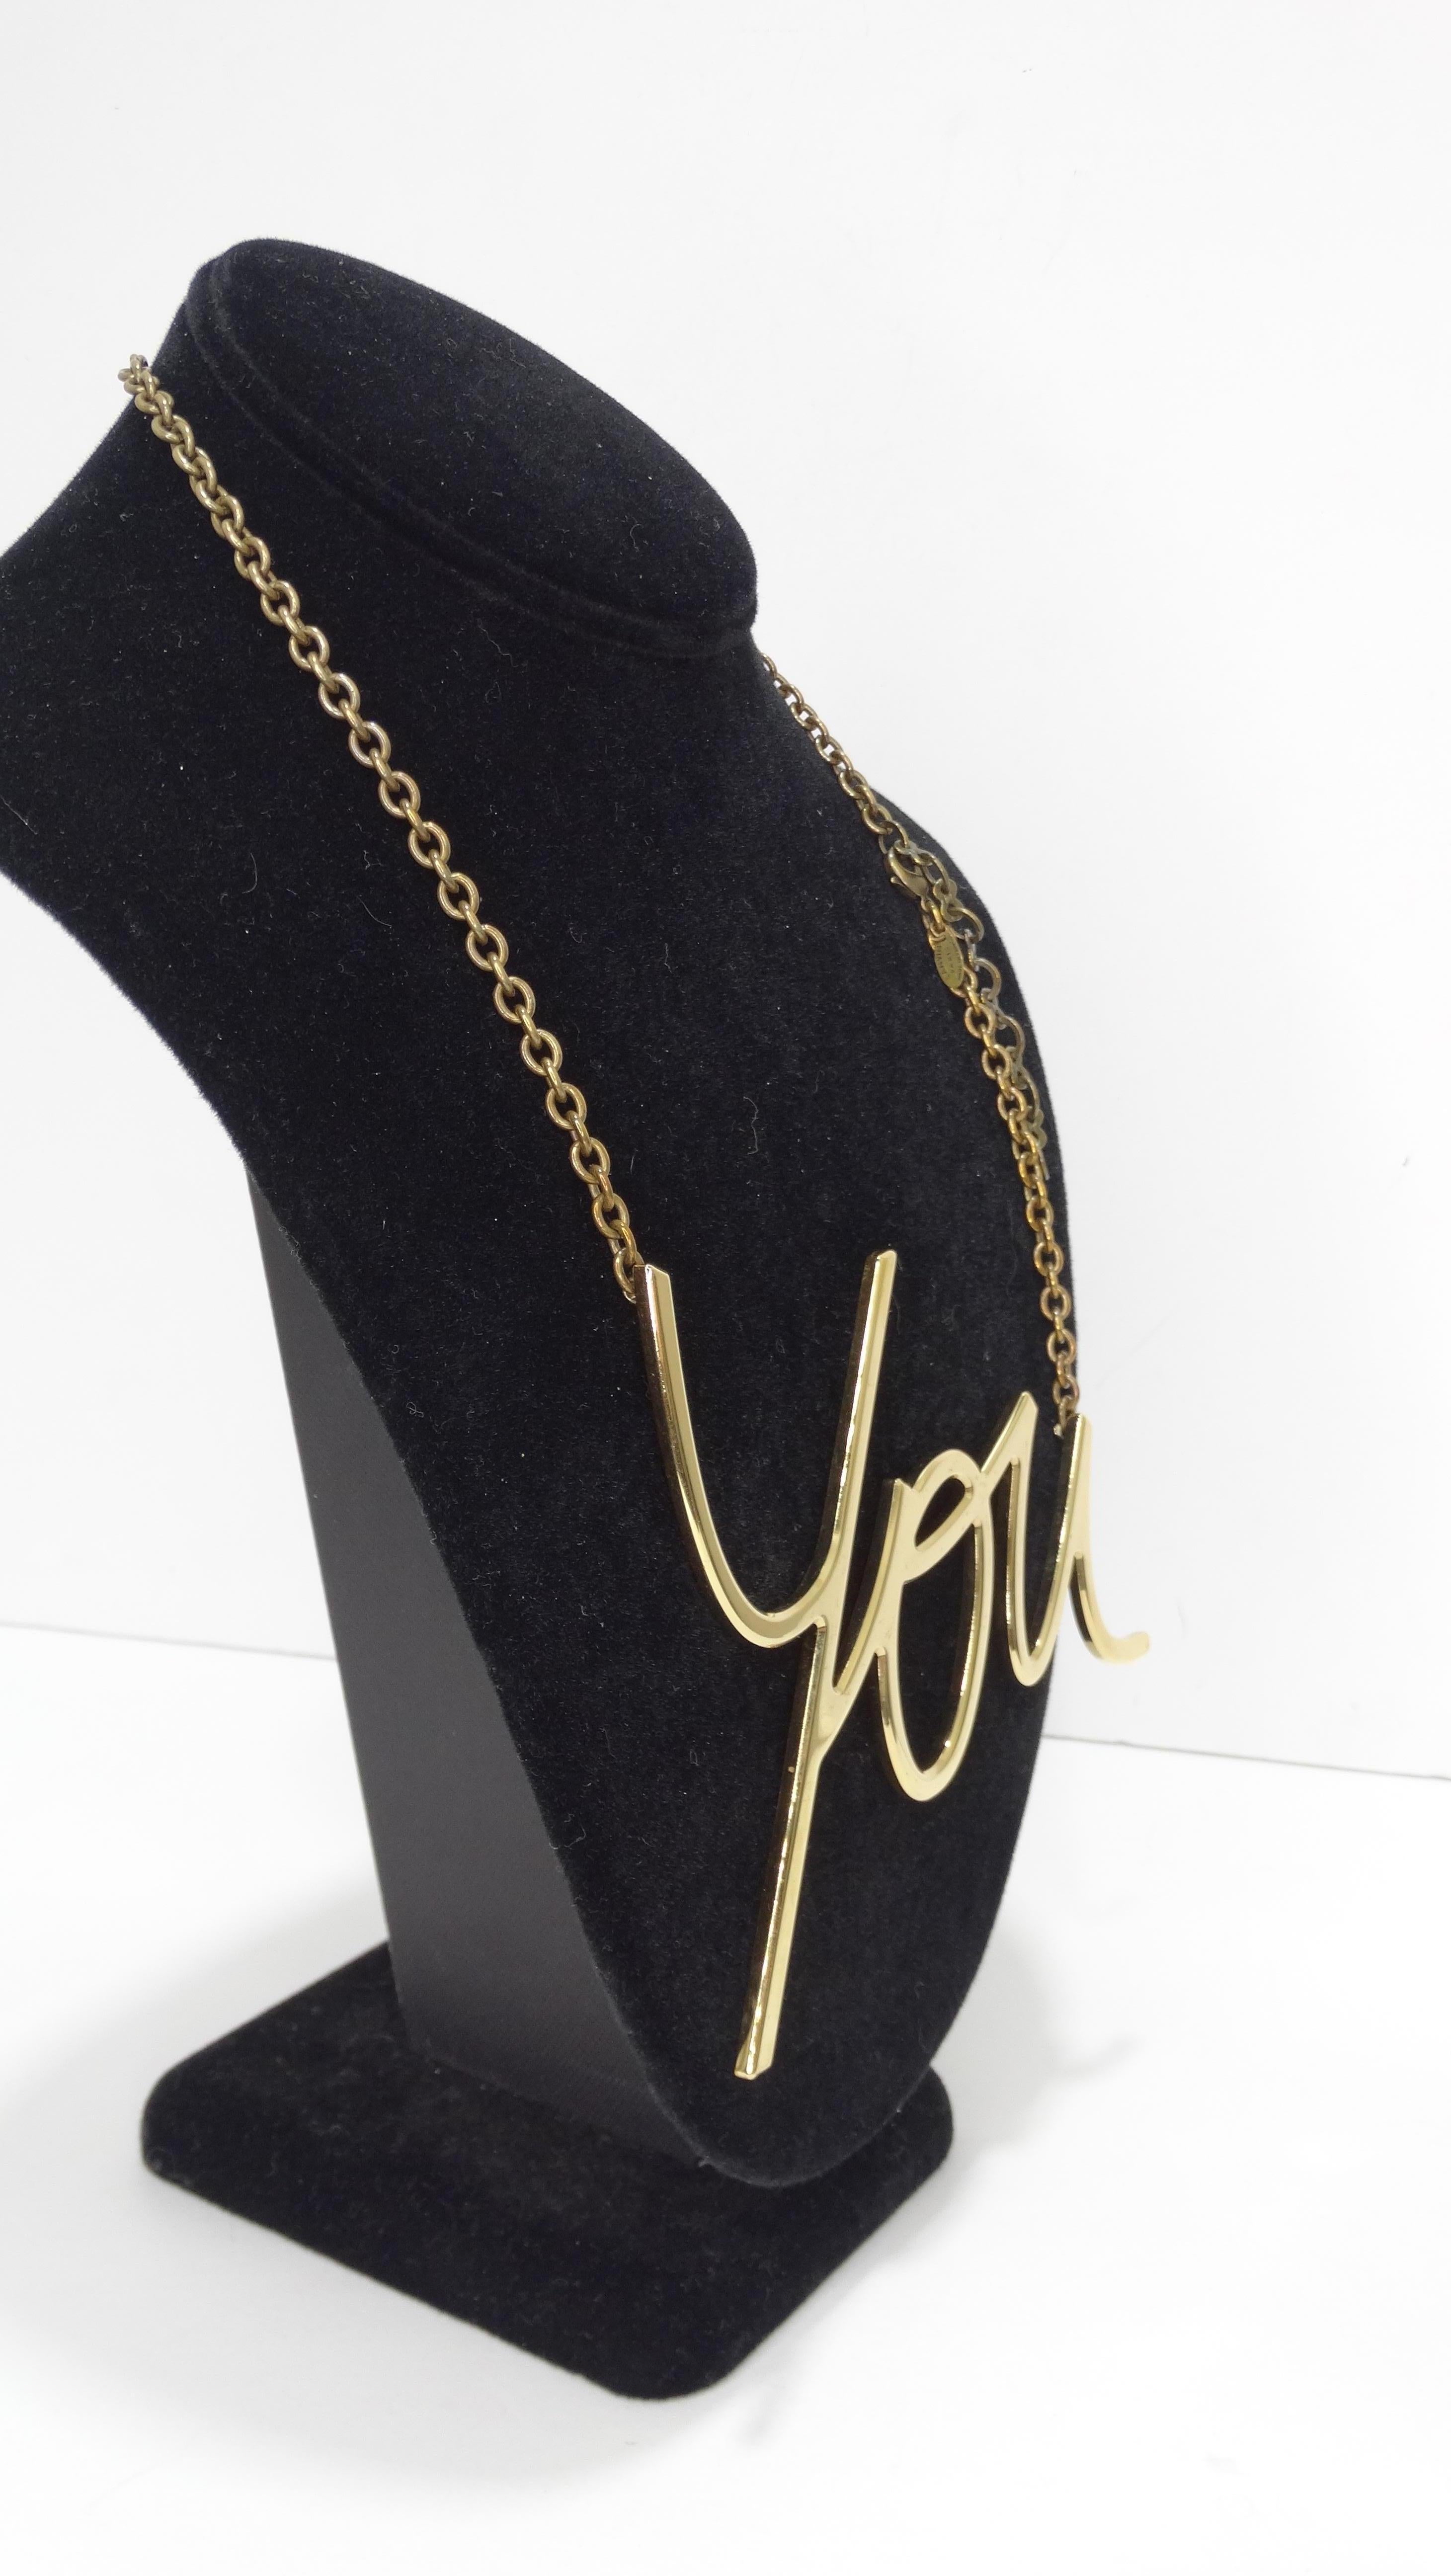 Make a statement with this amazing Albert Elbaz Lanvin necklace! Circa 2013/2014, this gilded metal necklace is plated in 18k gold and features the word 